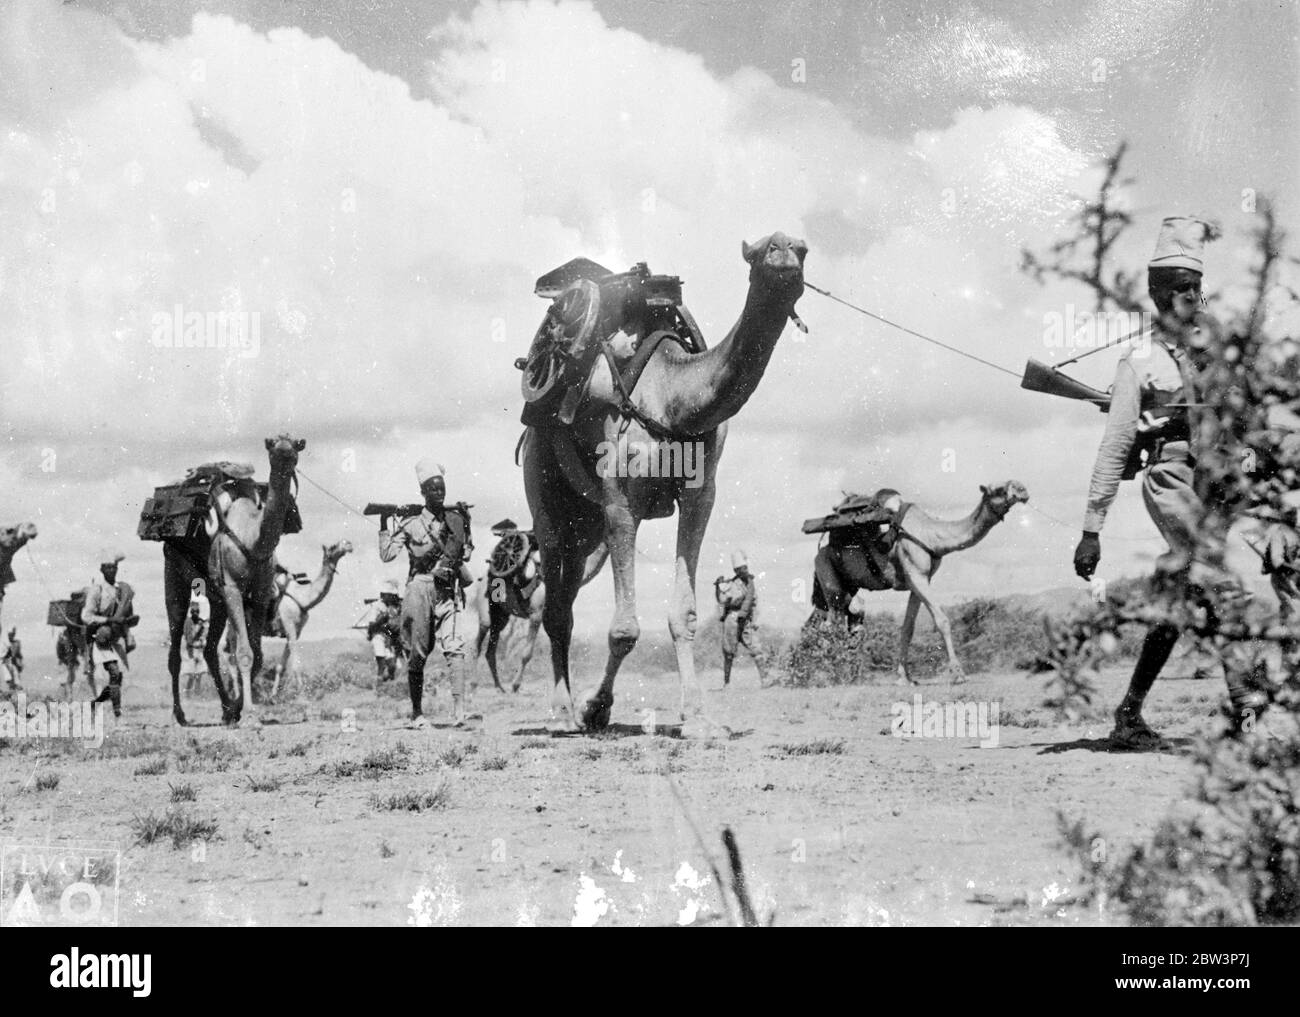 As Italians approached Addis Ababa . Road builders carve highway for troops . These pictures , just received in London , show the Italians completing their advance to Addis Ababa , Abyssinian capital . Led by Marshal Badoglio himself , the Italian forces entered the city to find it in the hands of murderers and looters . Photo shows , camels led by native troops taking Italian guns towards Addis Ababa . 8 May 1936 Stock Photo